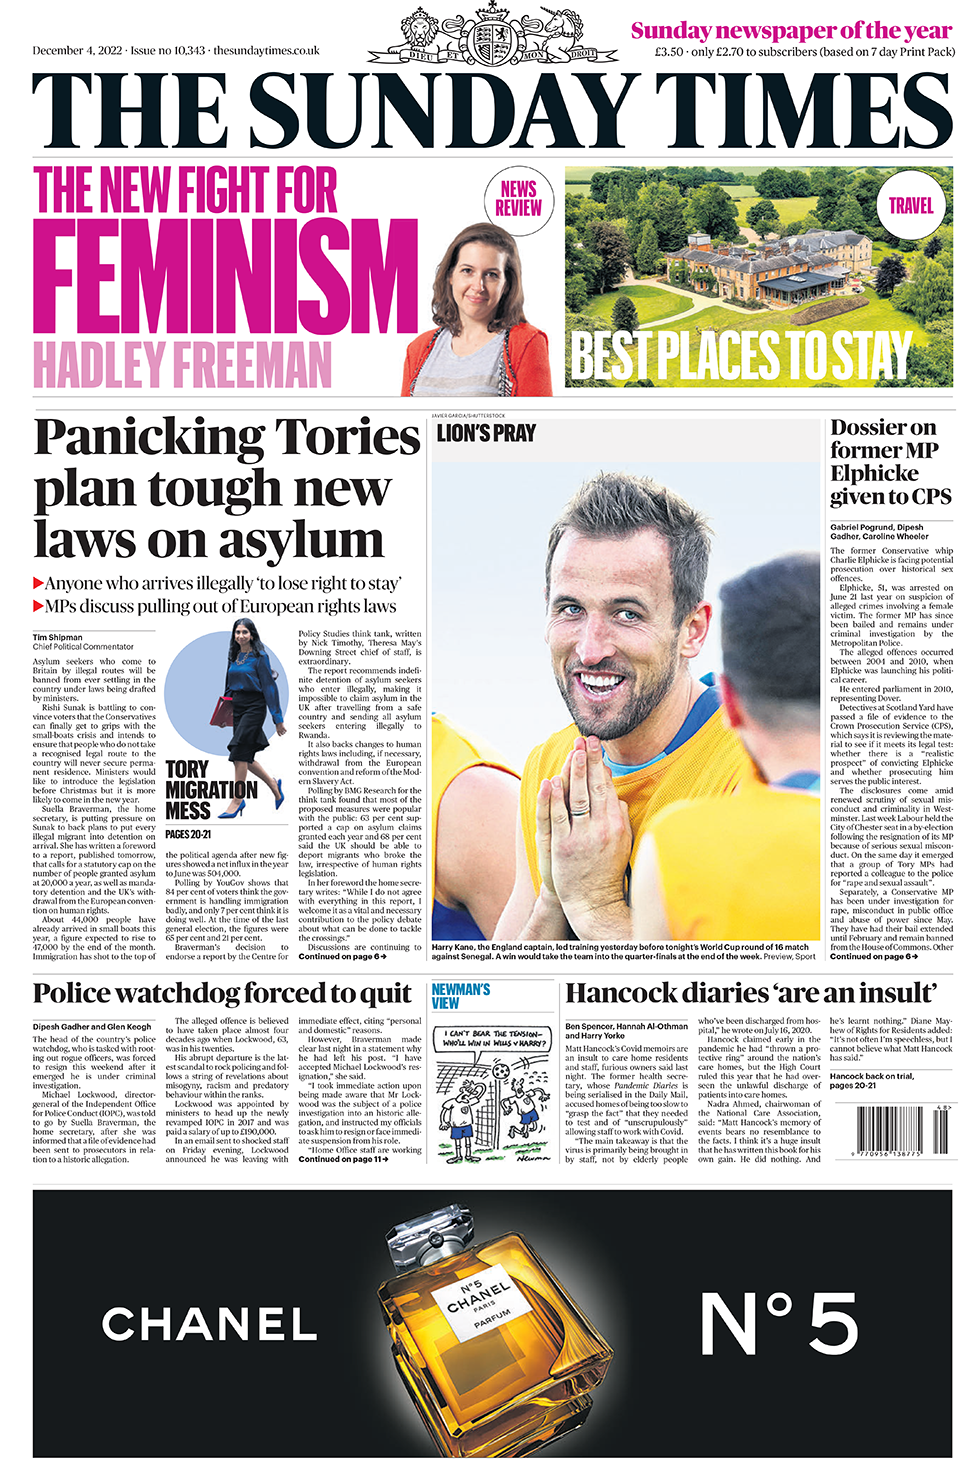 Front page of the Sunday Times, 4 December